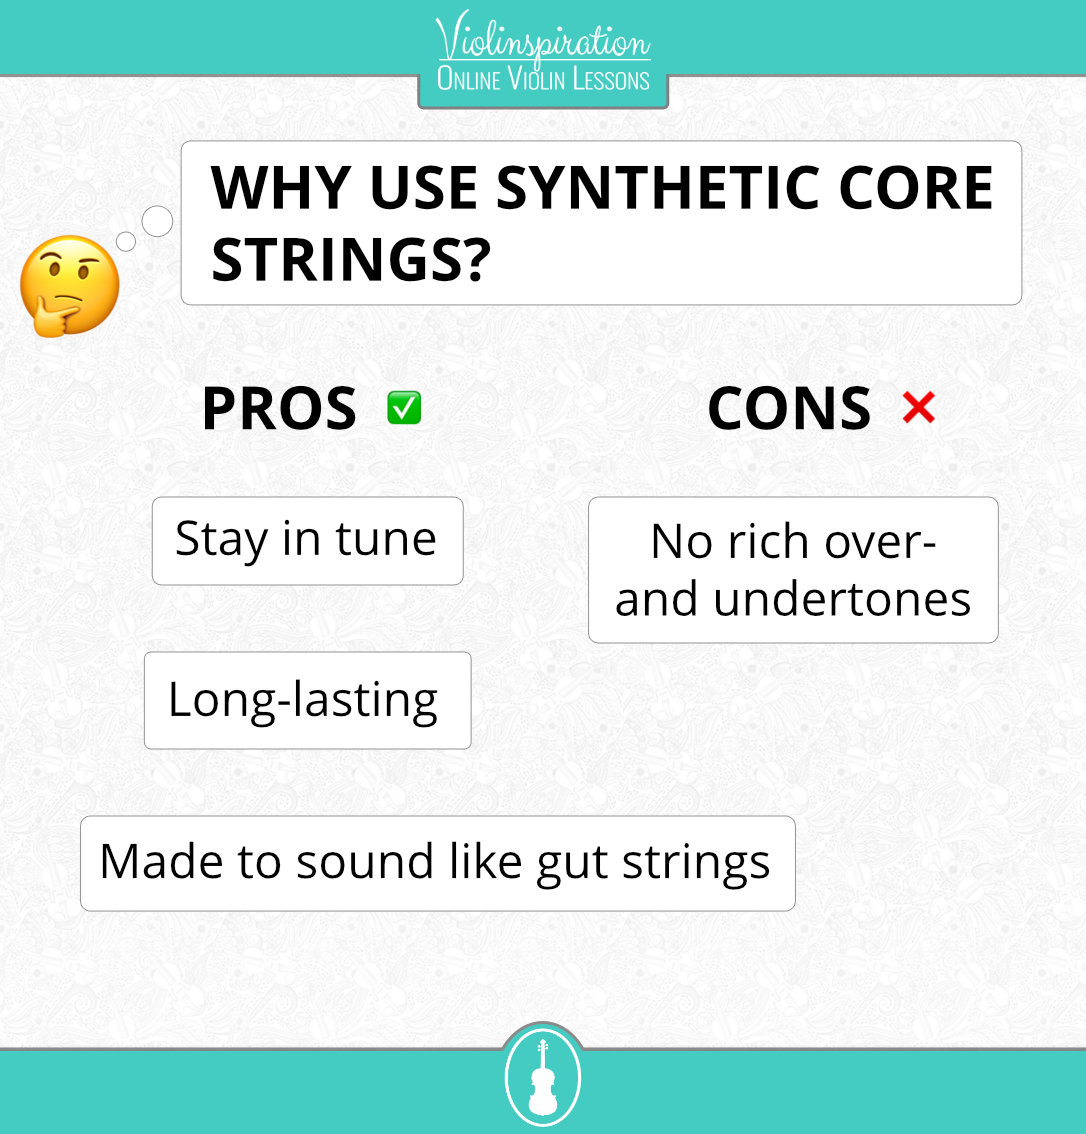 Violin strings - pros and cons